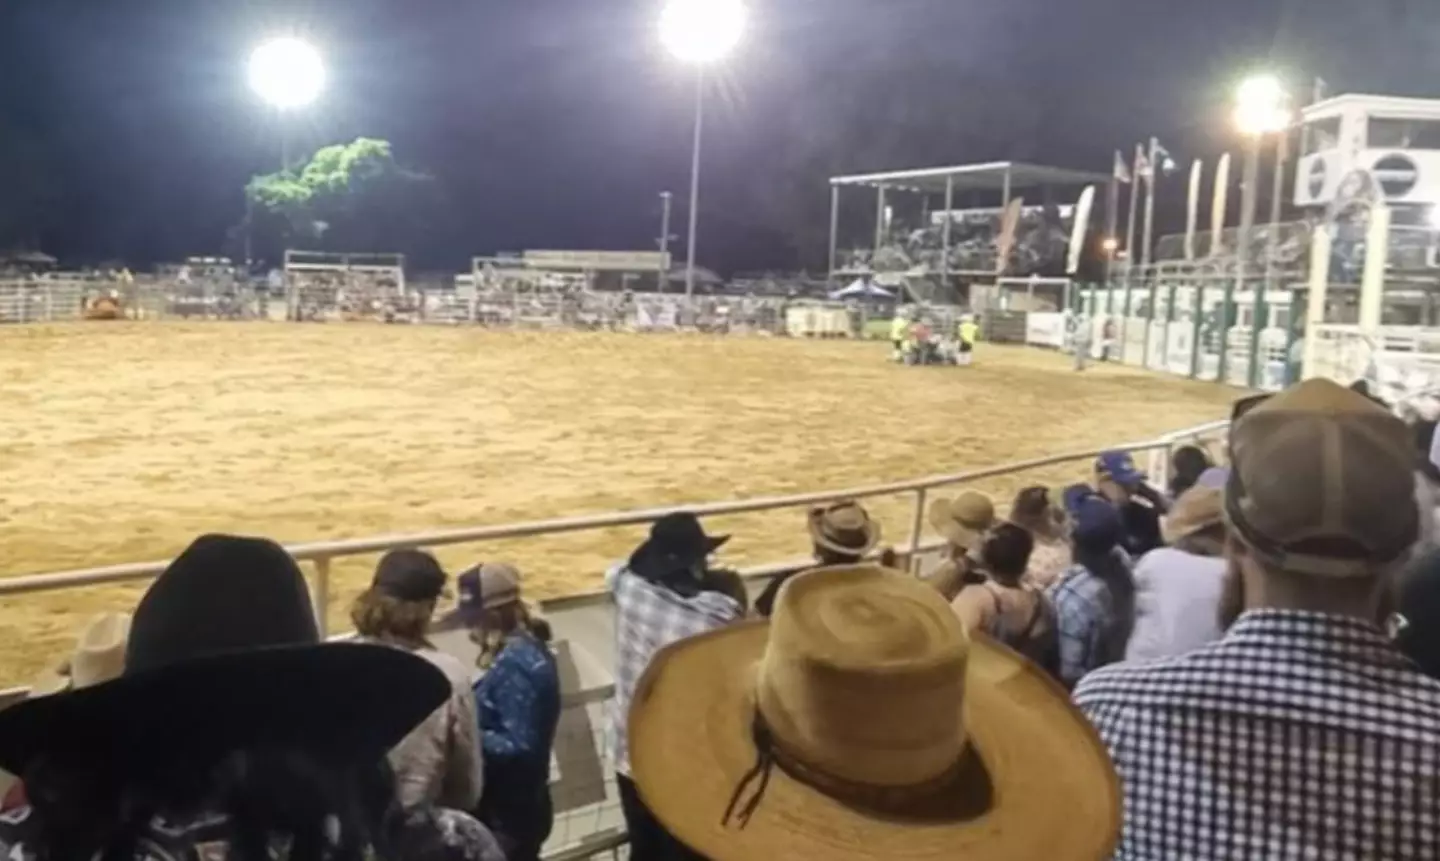 The man died after being struck by the bull.